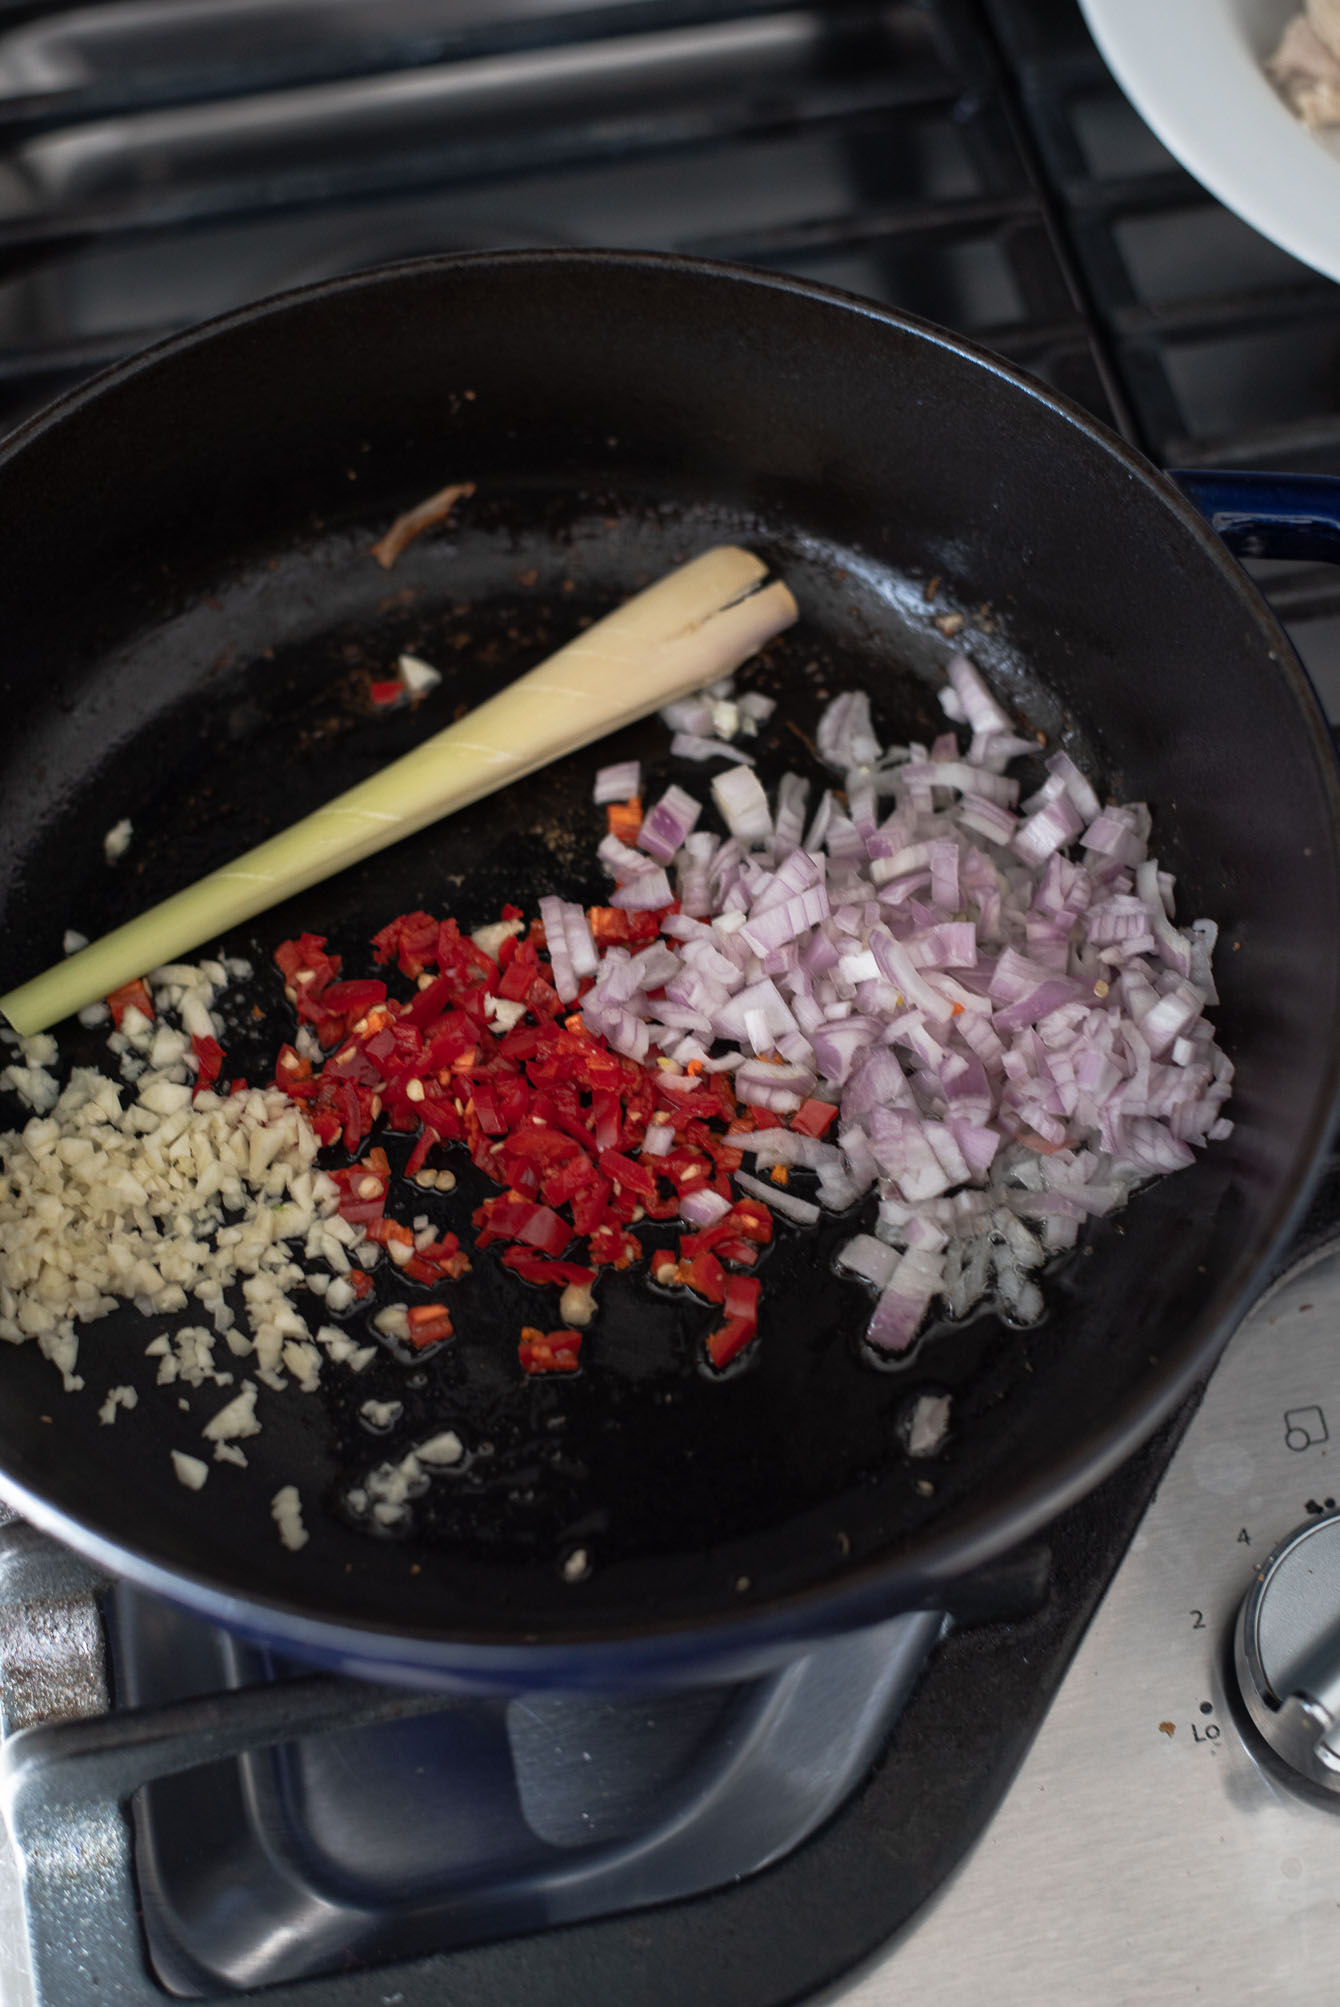 Savory ingredients are added to the pot to make Thai red curry chicken.